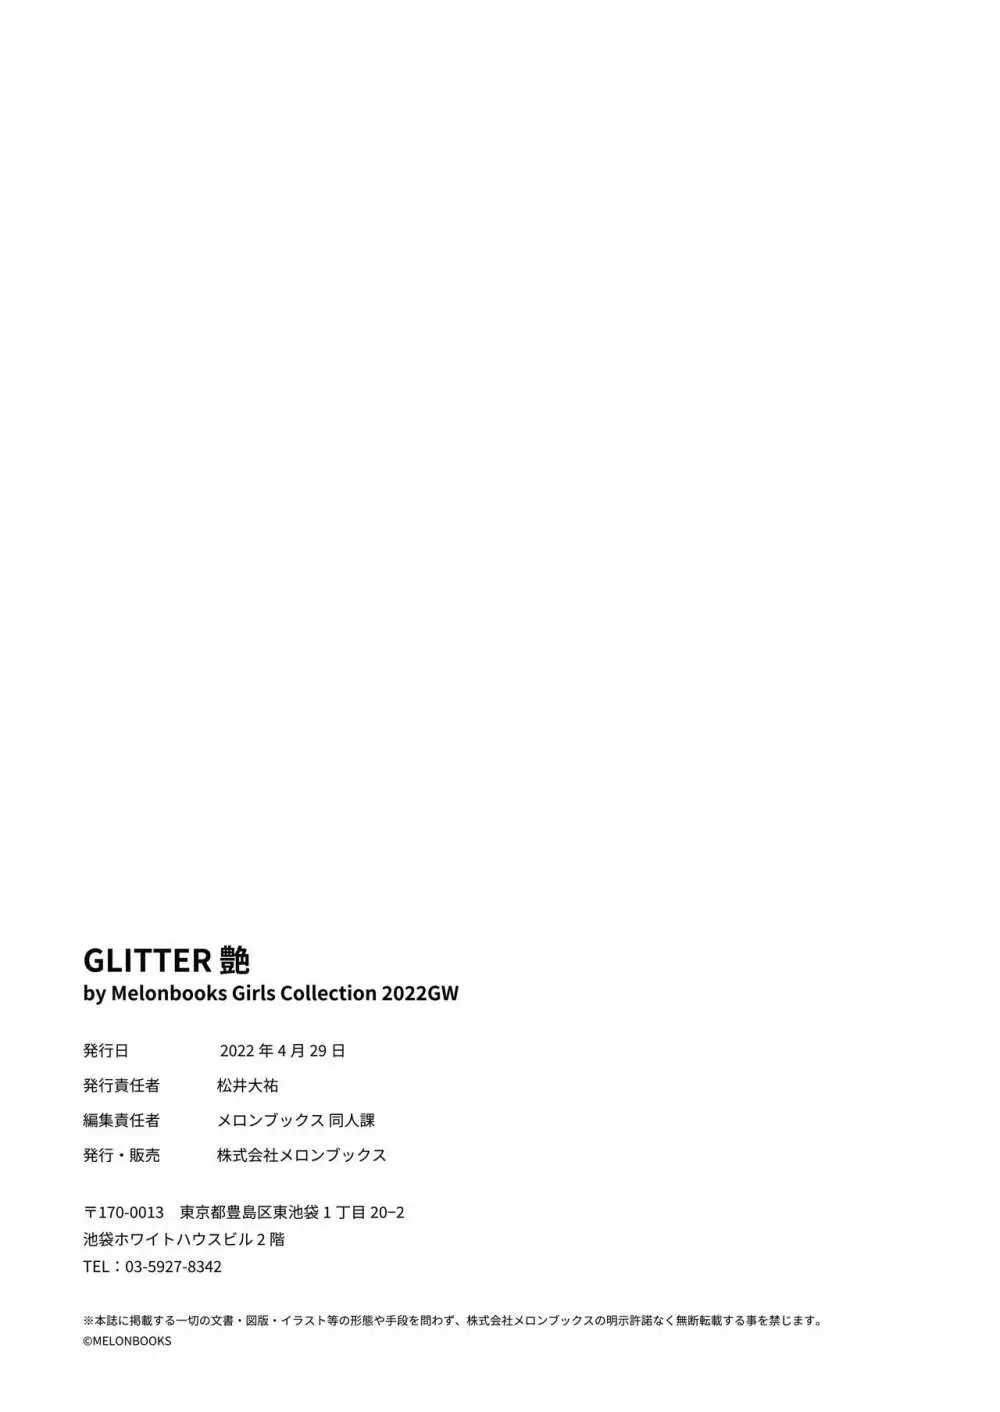 GLITTER 艶 by Melonbooks Girls Collection 2022GW 103ページ